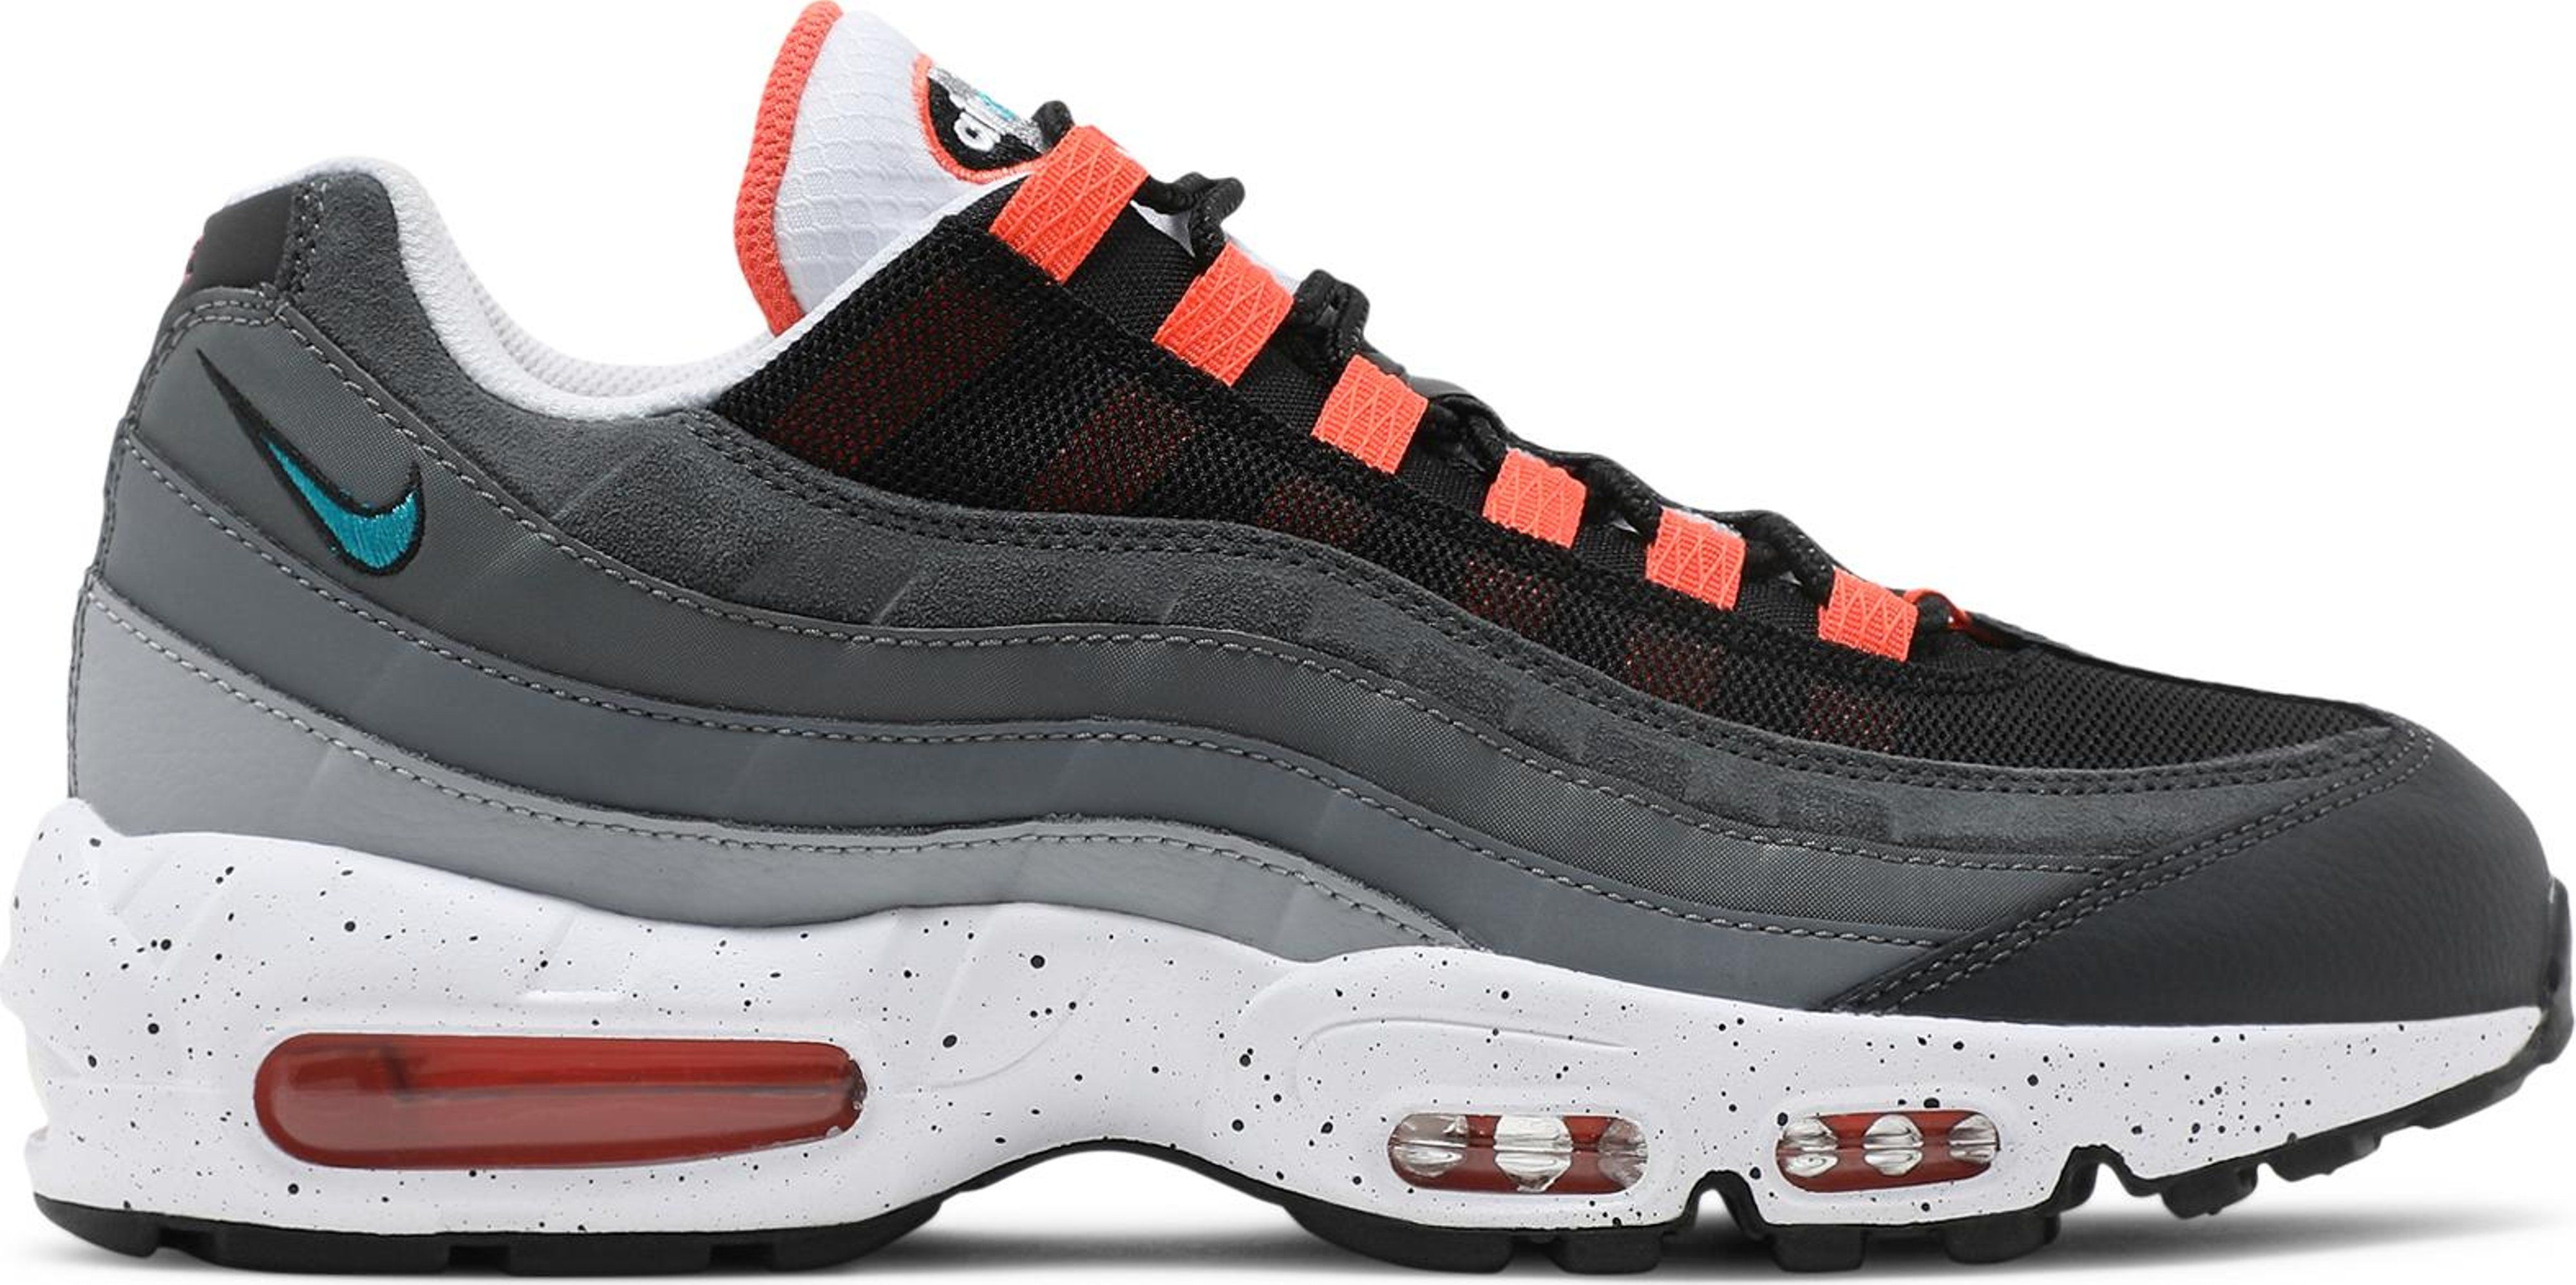 Air Max 95 'Black Speckled' | GOAT